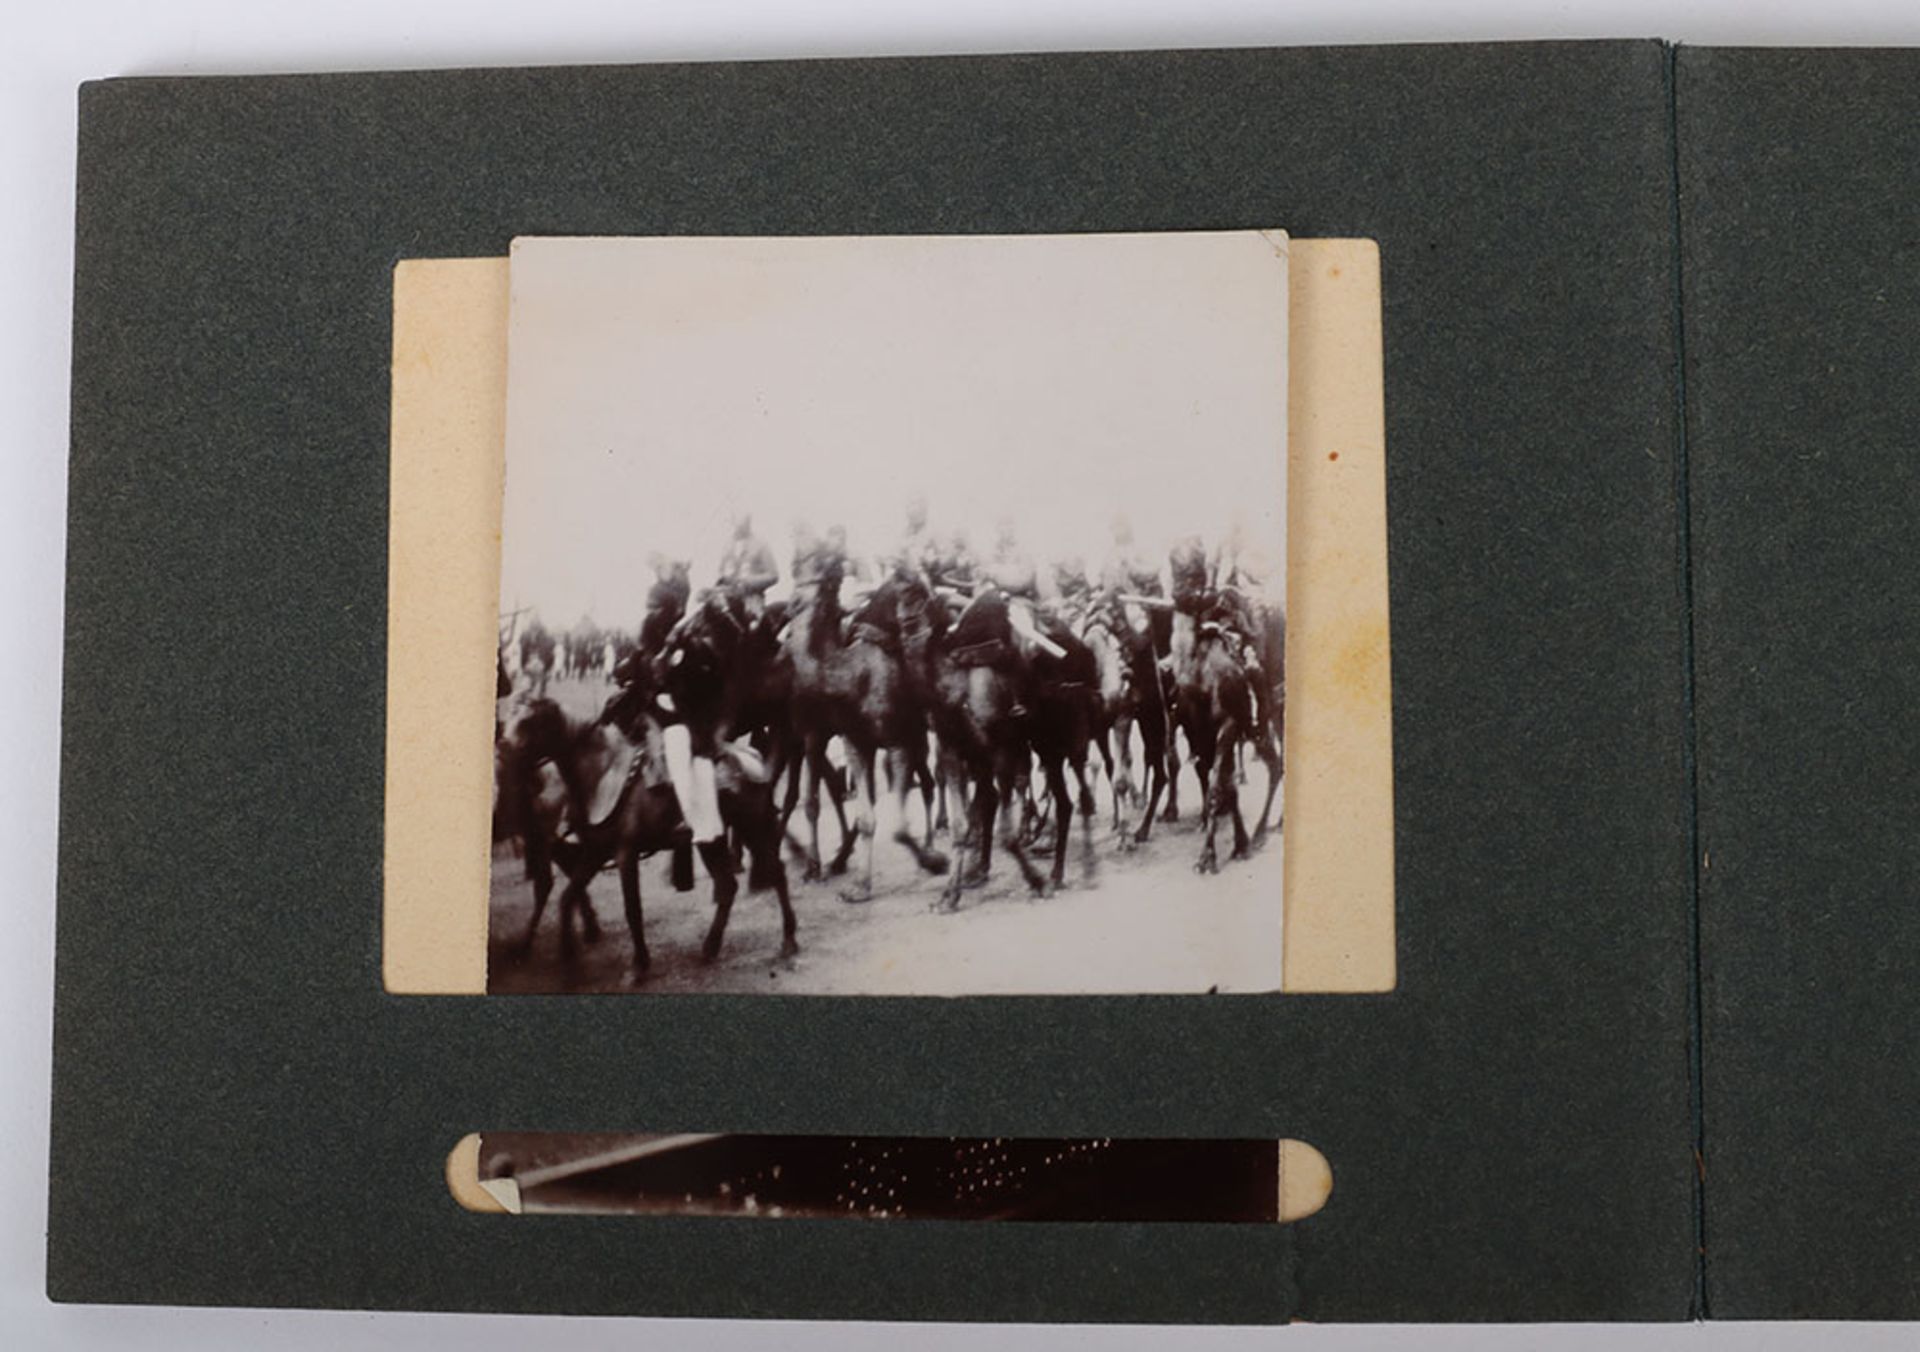 Photograph Album with images of ther Delhi Durbar, troops lining streets, Elephants, sacred cows bel - Image 47 of 48